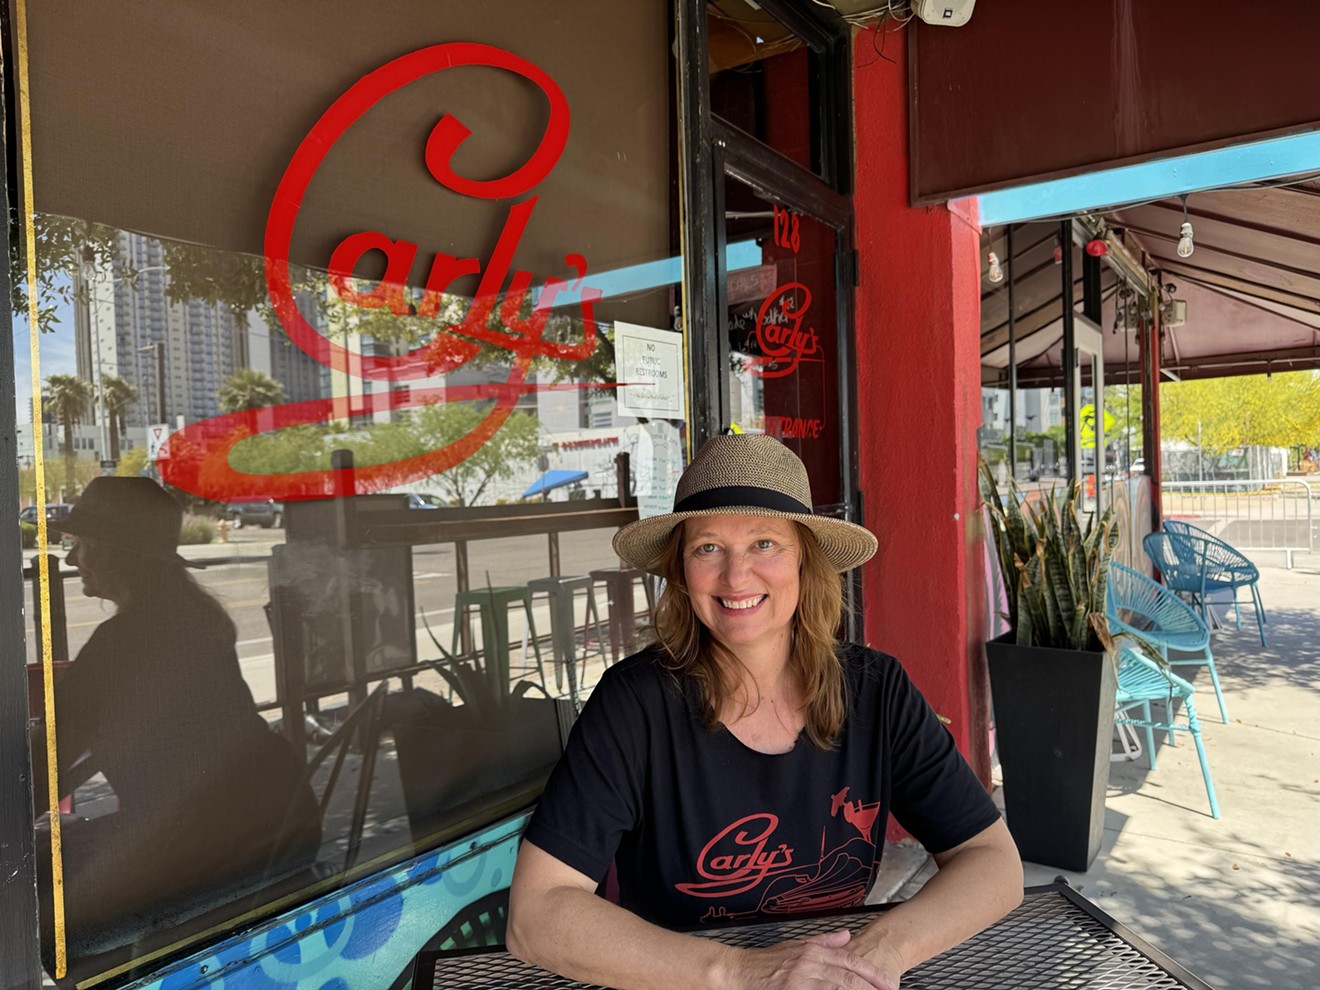 Carly's Bistro co-owner Carla Wade Logan says she and her husband John Logan are ready to start a new chapter. The longstanding Roosevelt Row restaurant will close on May 3.